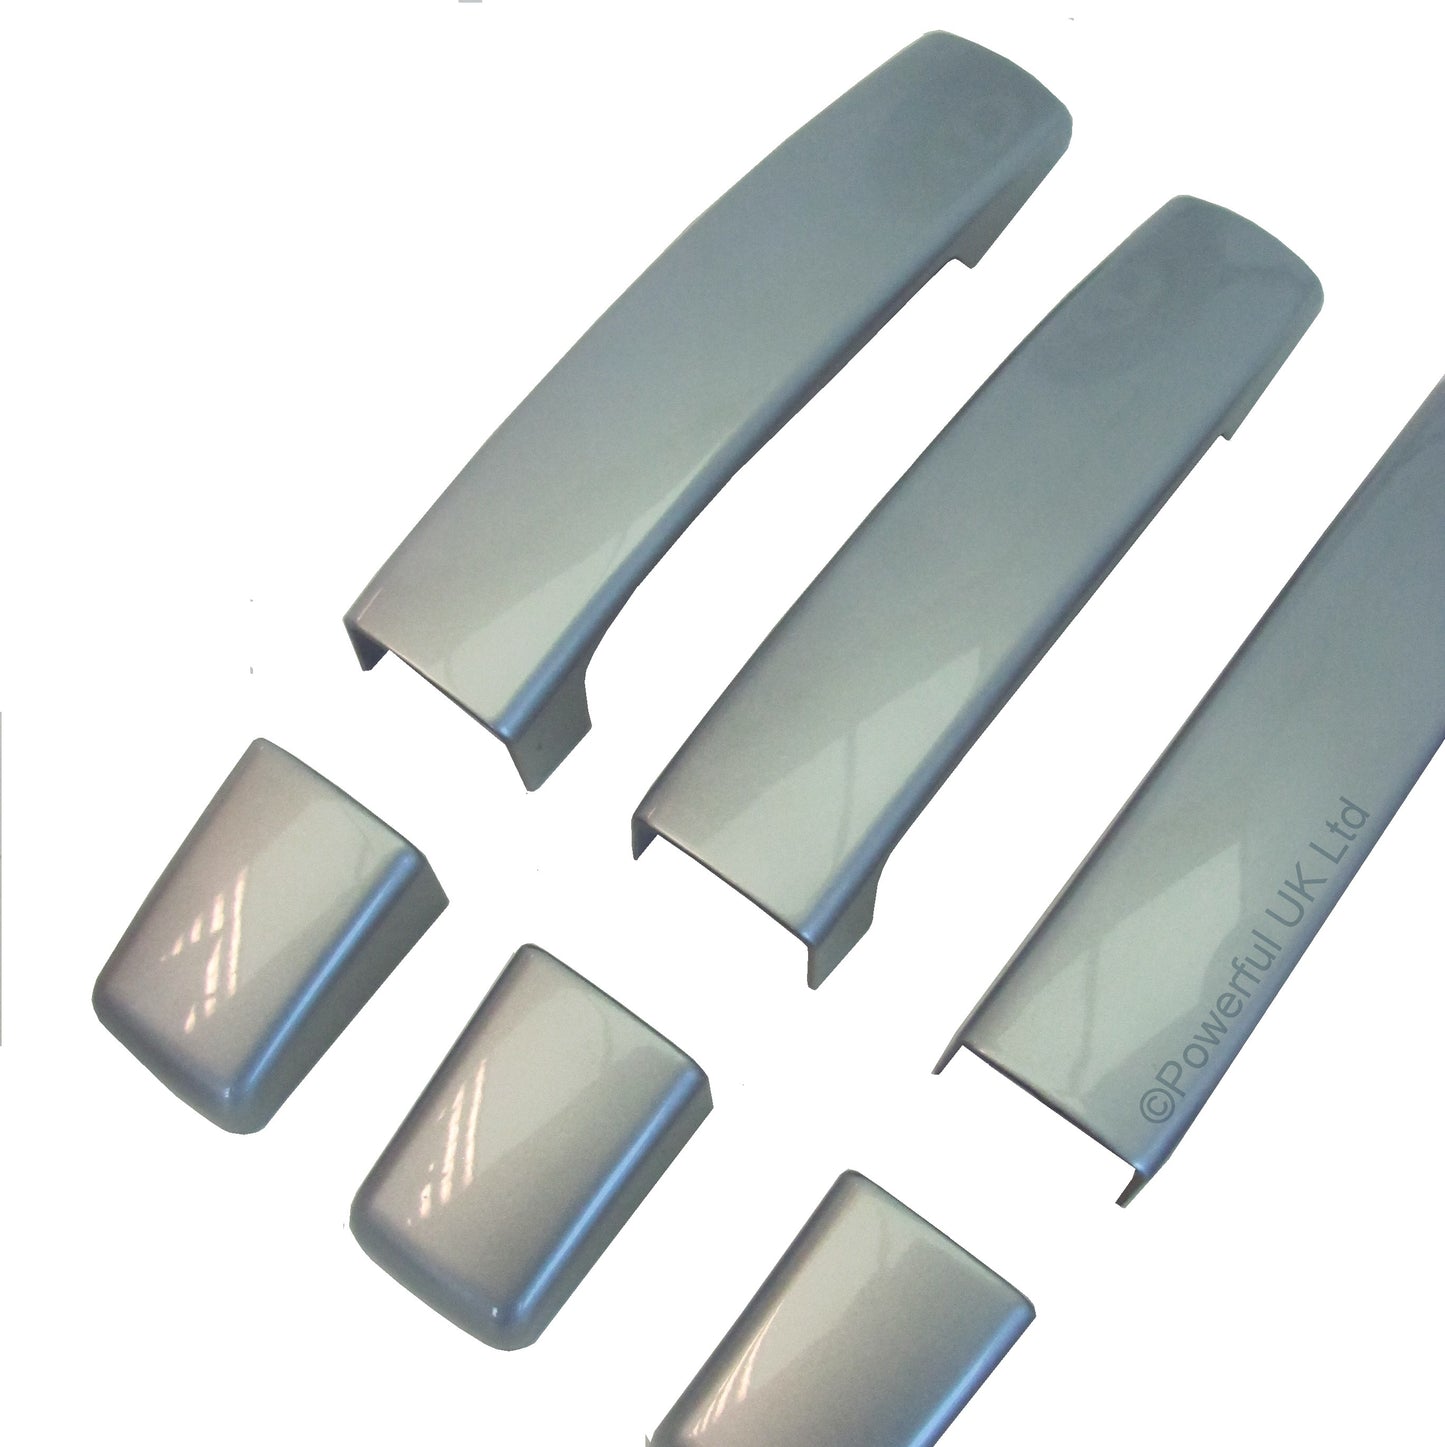 Door Handle Covers for Land Rover Discovery 3 fitted with 1 pc Handles  - Zermatt Silver